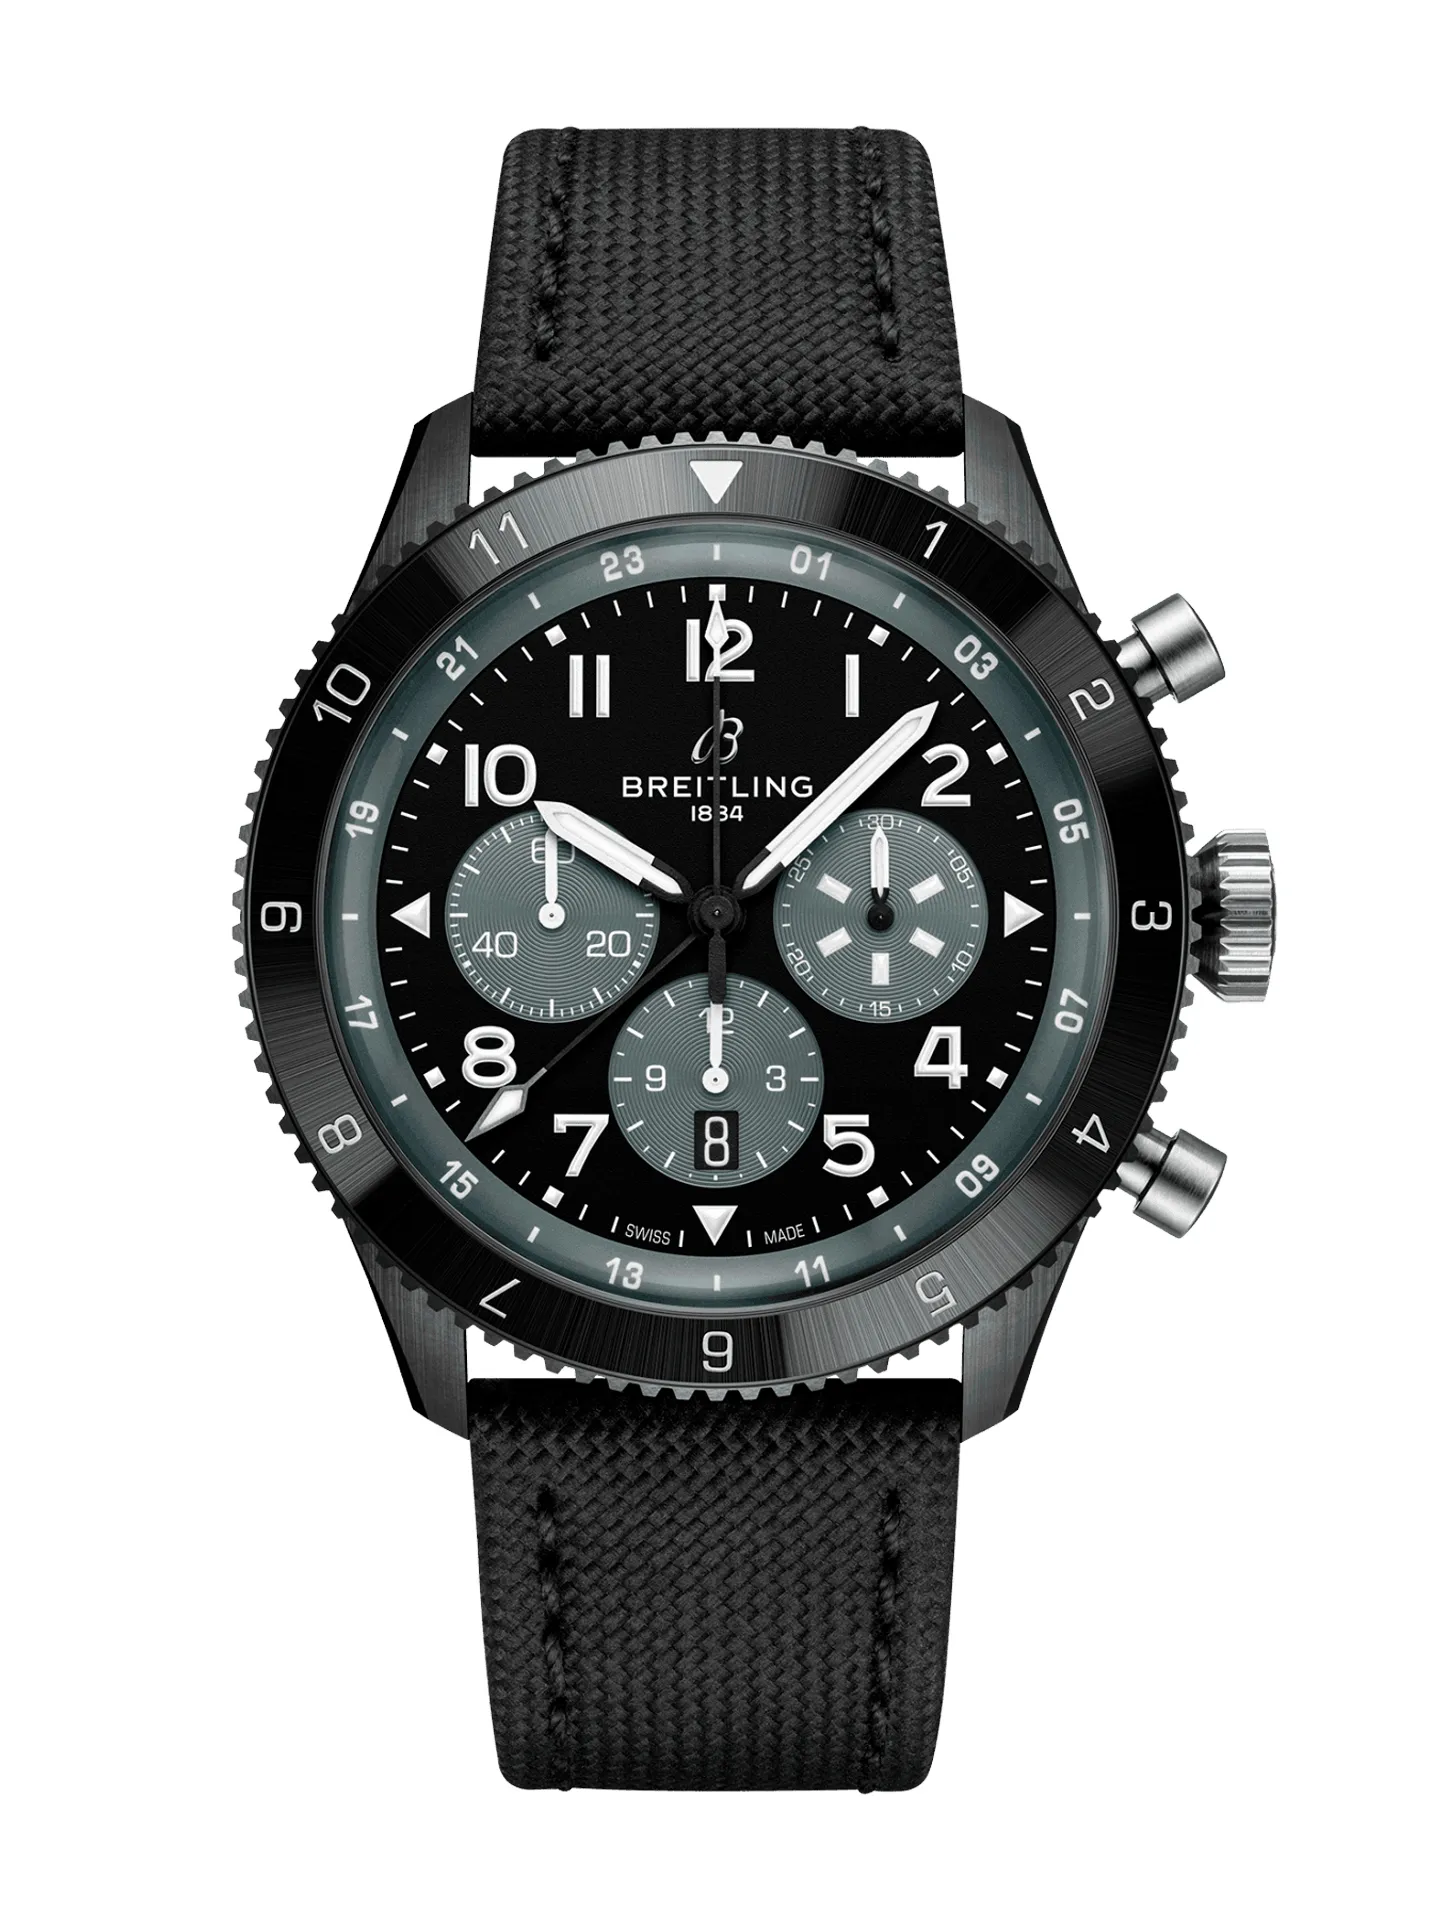 Best black replica watches uk that will take your monochrome wardrobe to the next level